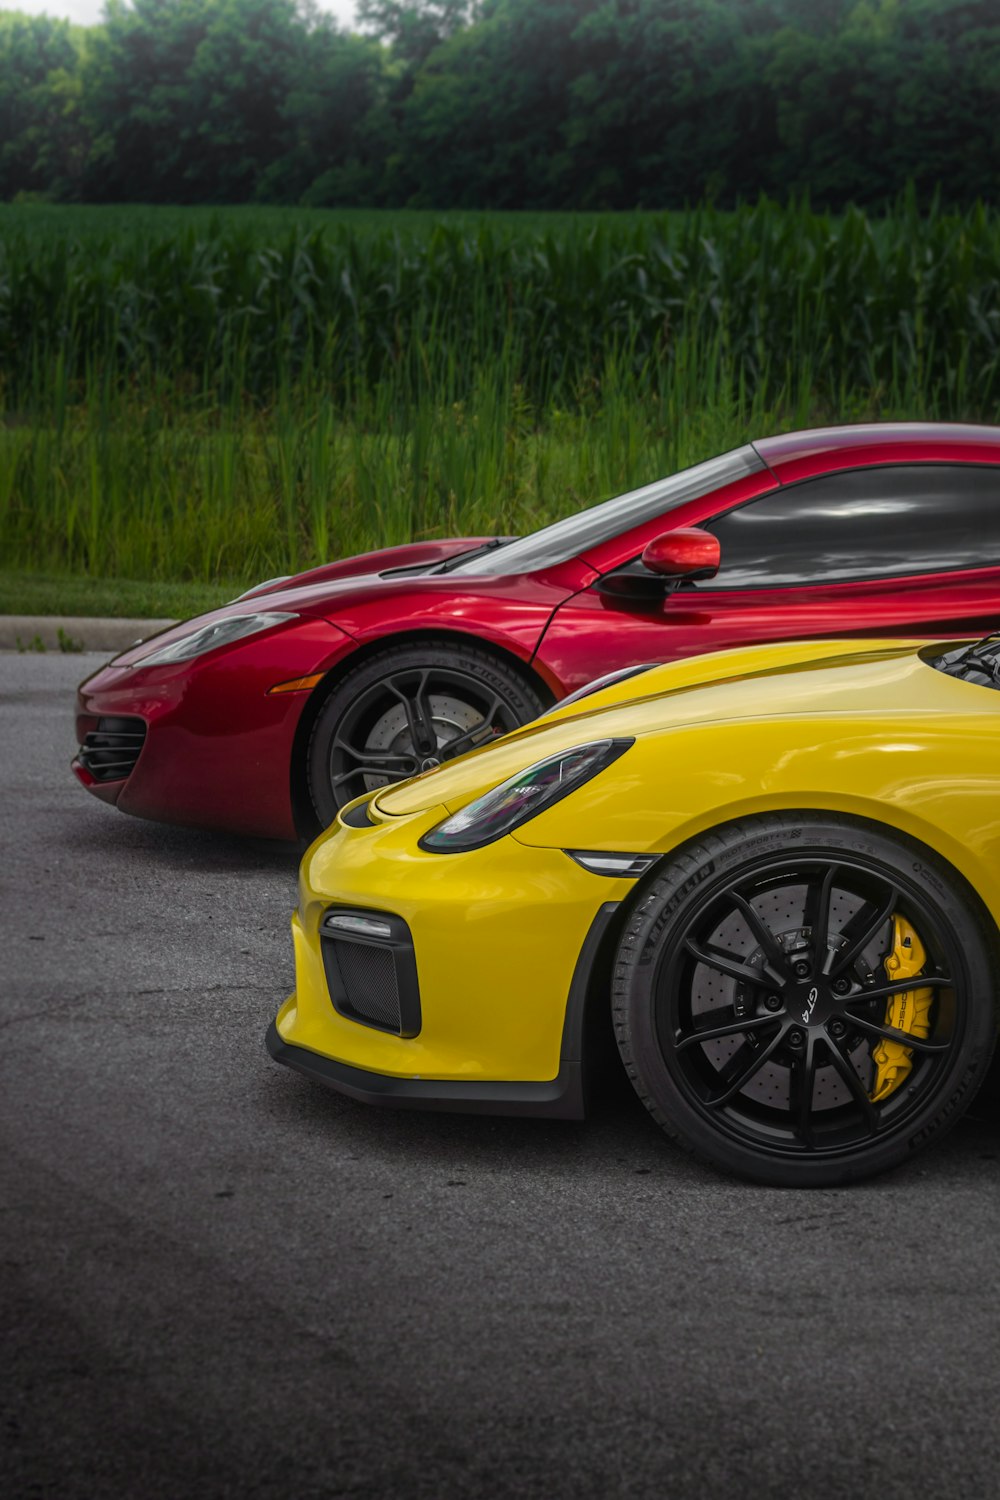 two red and yellow sports cars parked in a parking lot